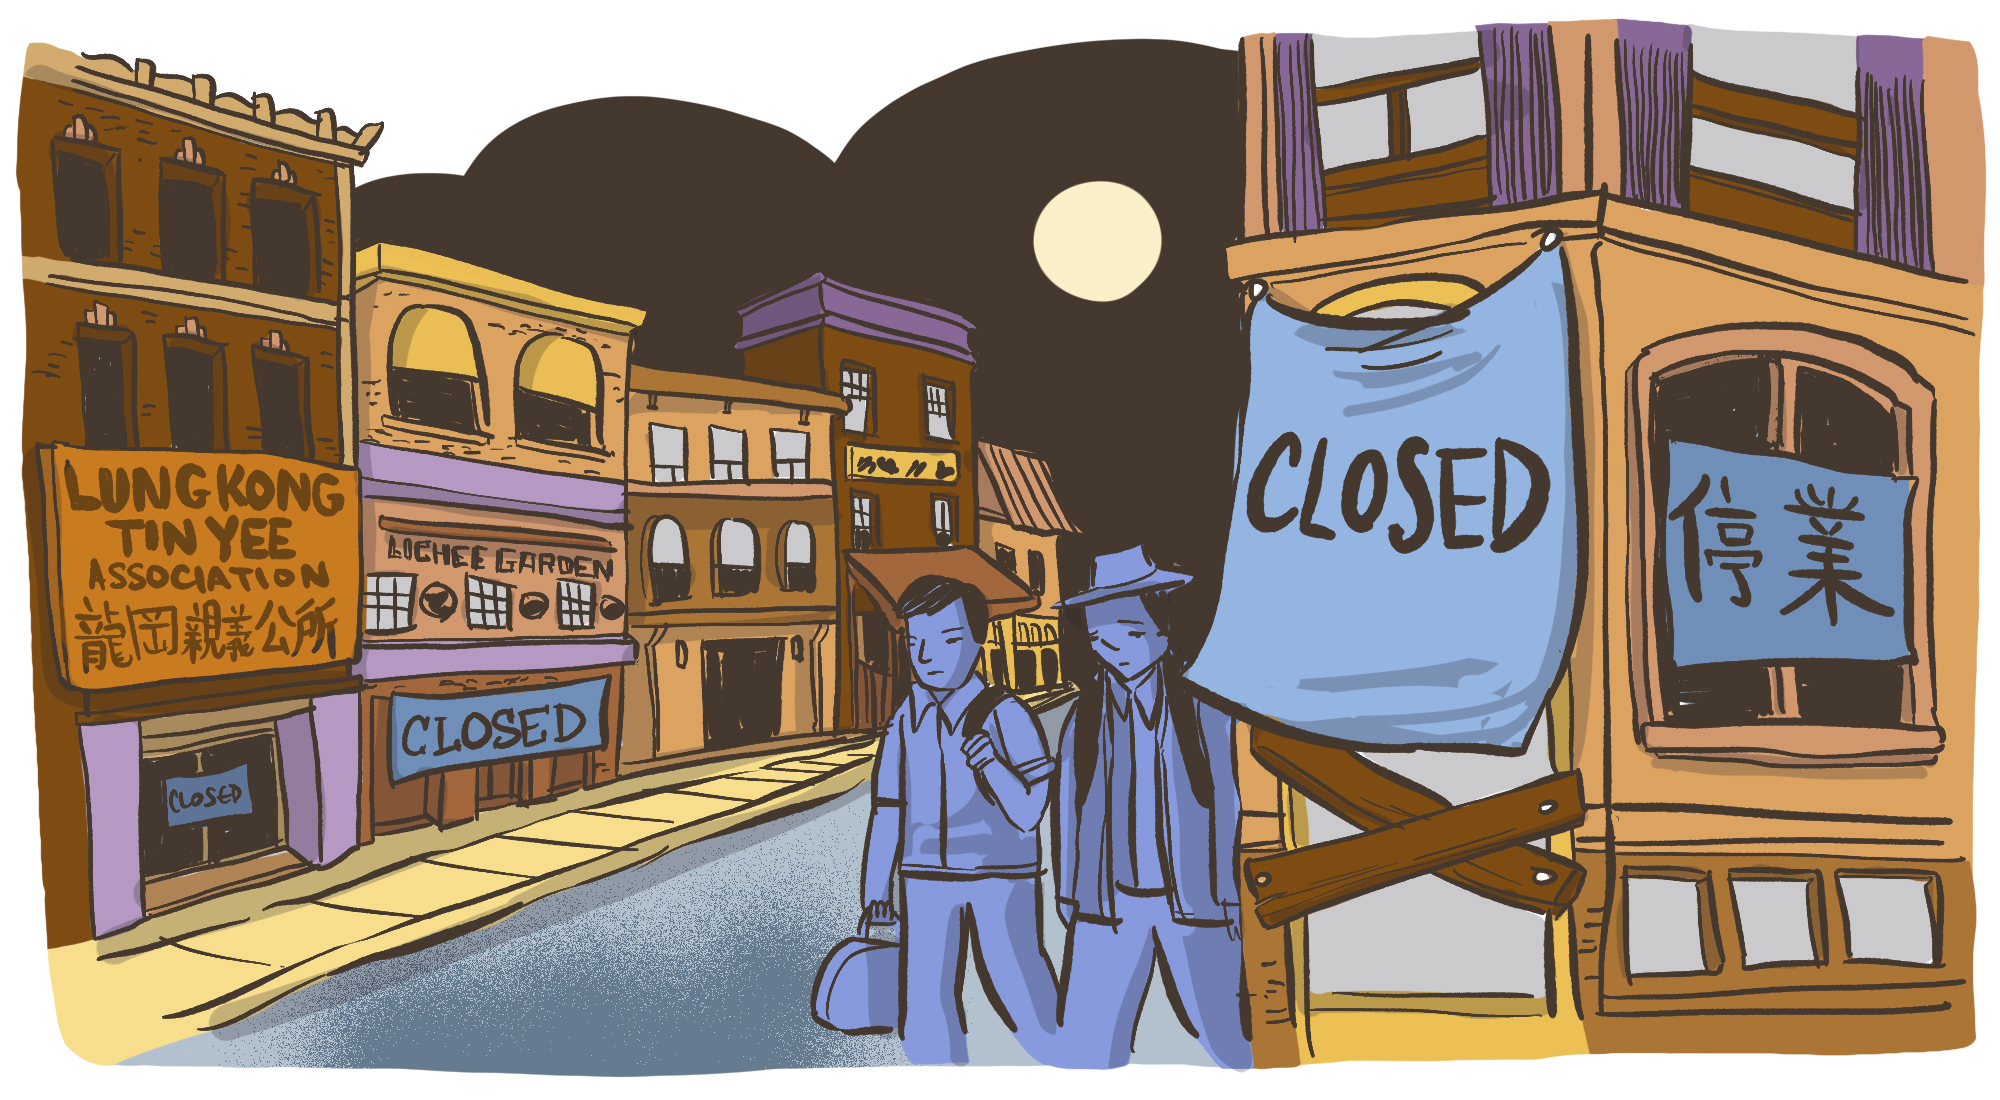 An illustration of shops in Chinatown closed down after Chinese Exclusion Act. On the right hand side of the image, stands a building with "closed" sign in both English and Chinese. Two Chinese residents walk pass the building. The street in the middle is empty, and on the left hand side, stands more store front with closed sign.